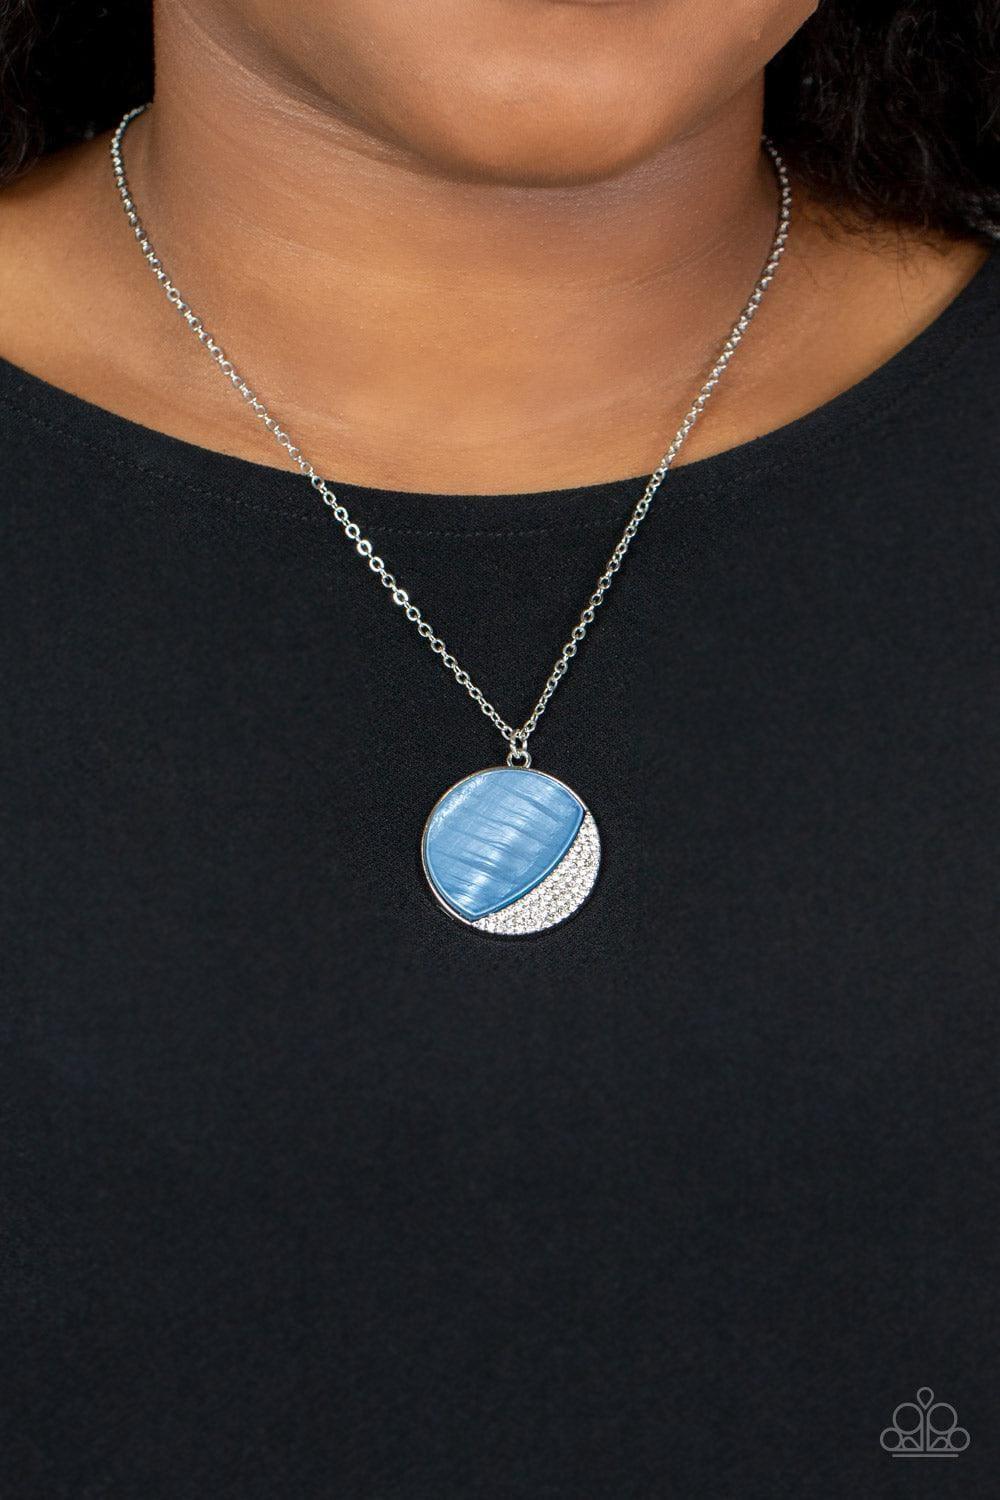 Paparazzi Accessories - Oceanic Eclipse - Blue Necklace - Bling by JessieK